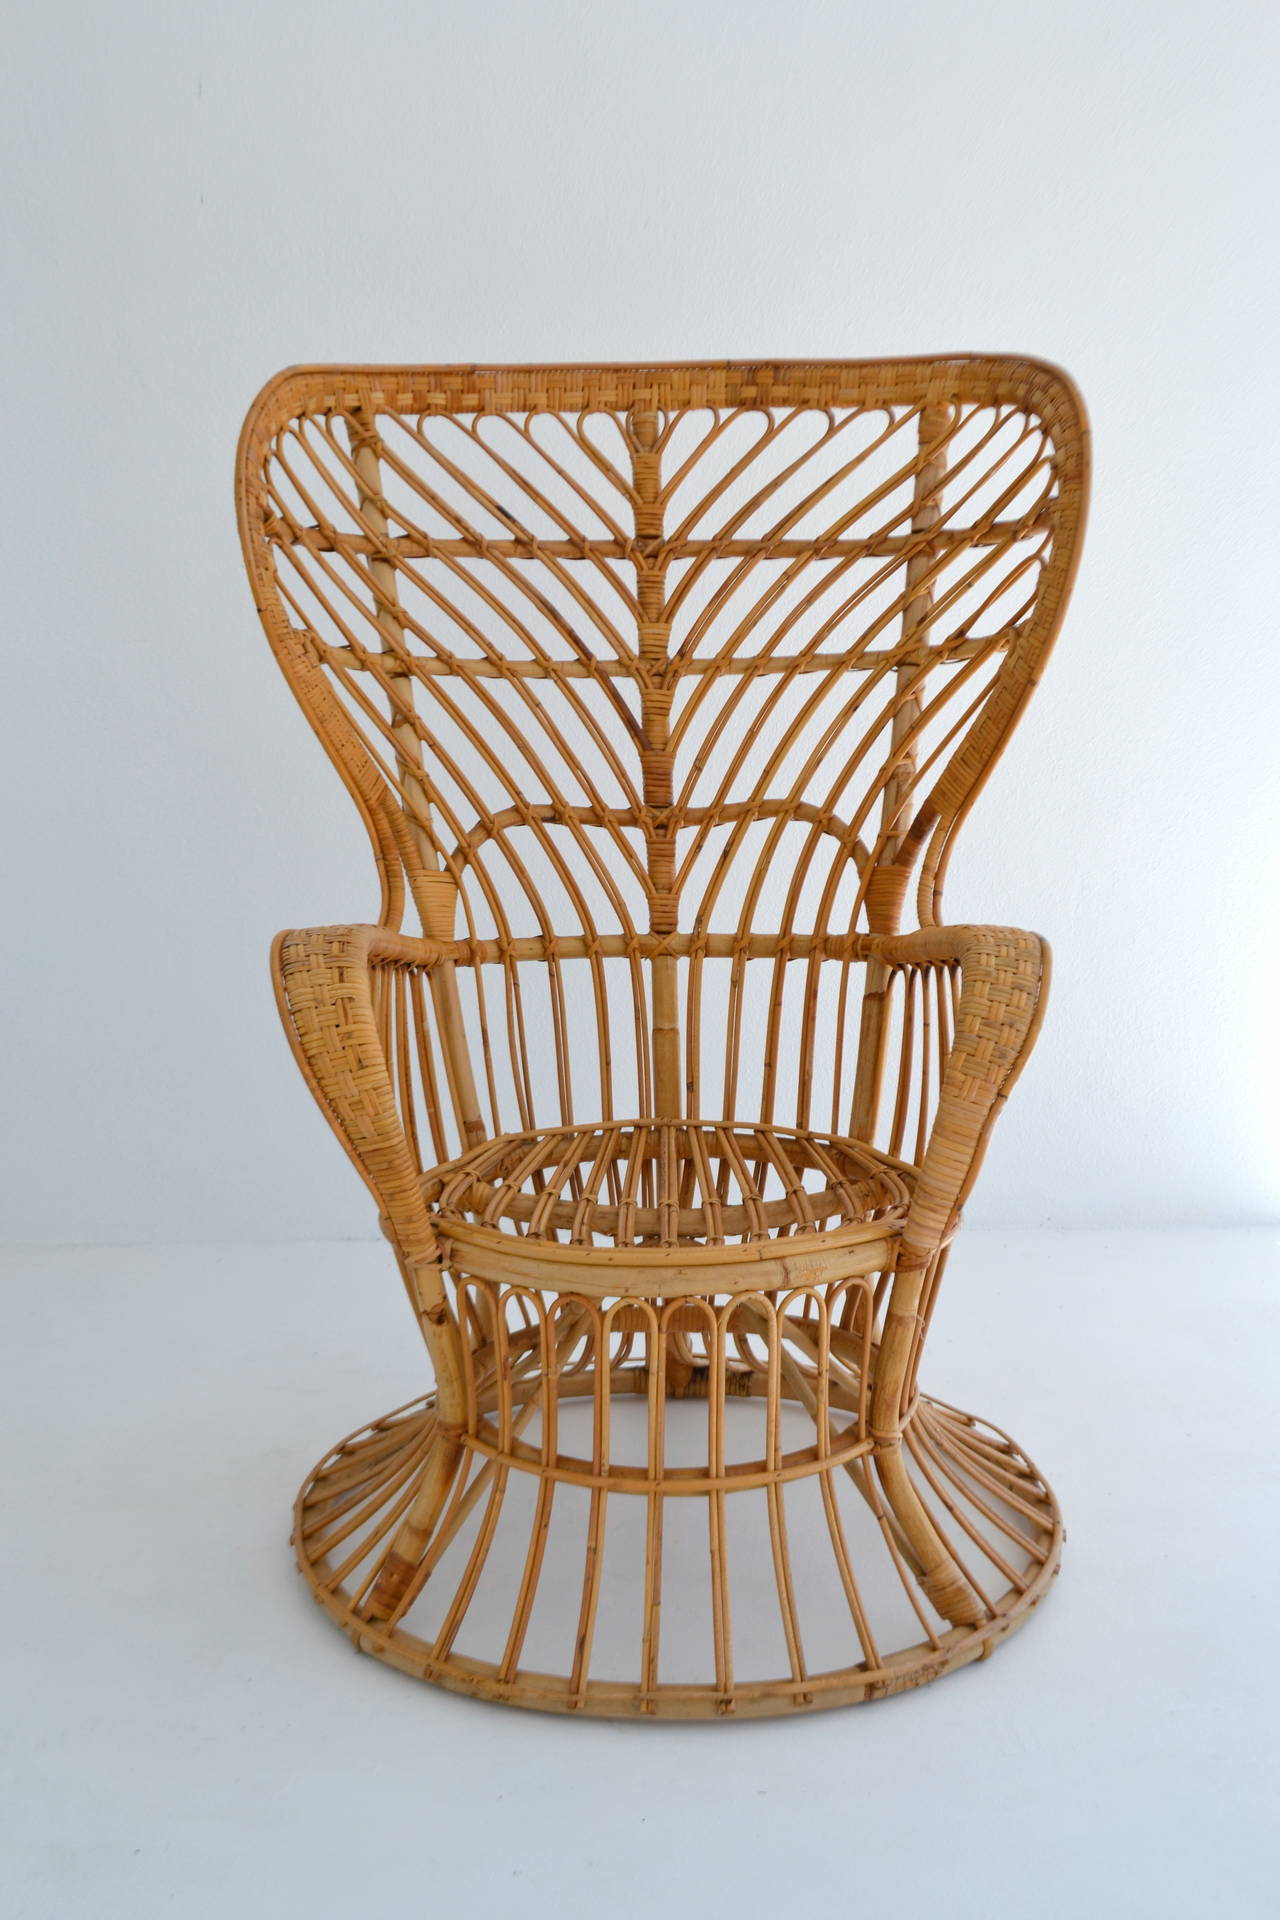 Woven Rattan and Bamboo Chair 1